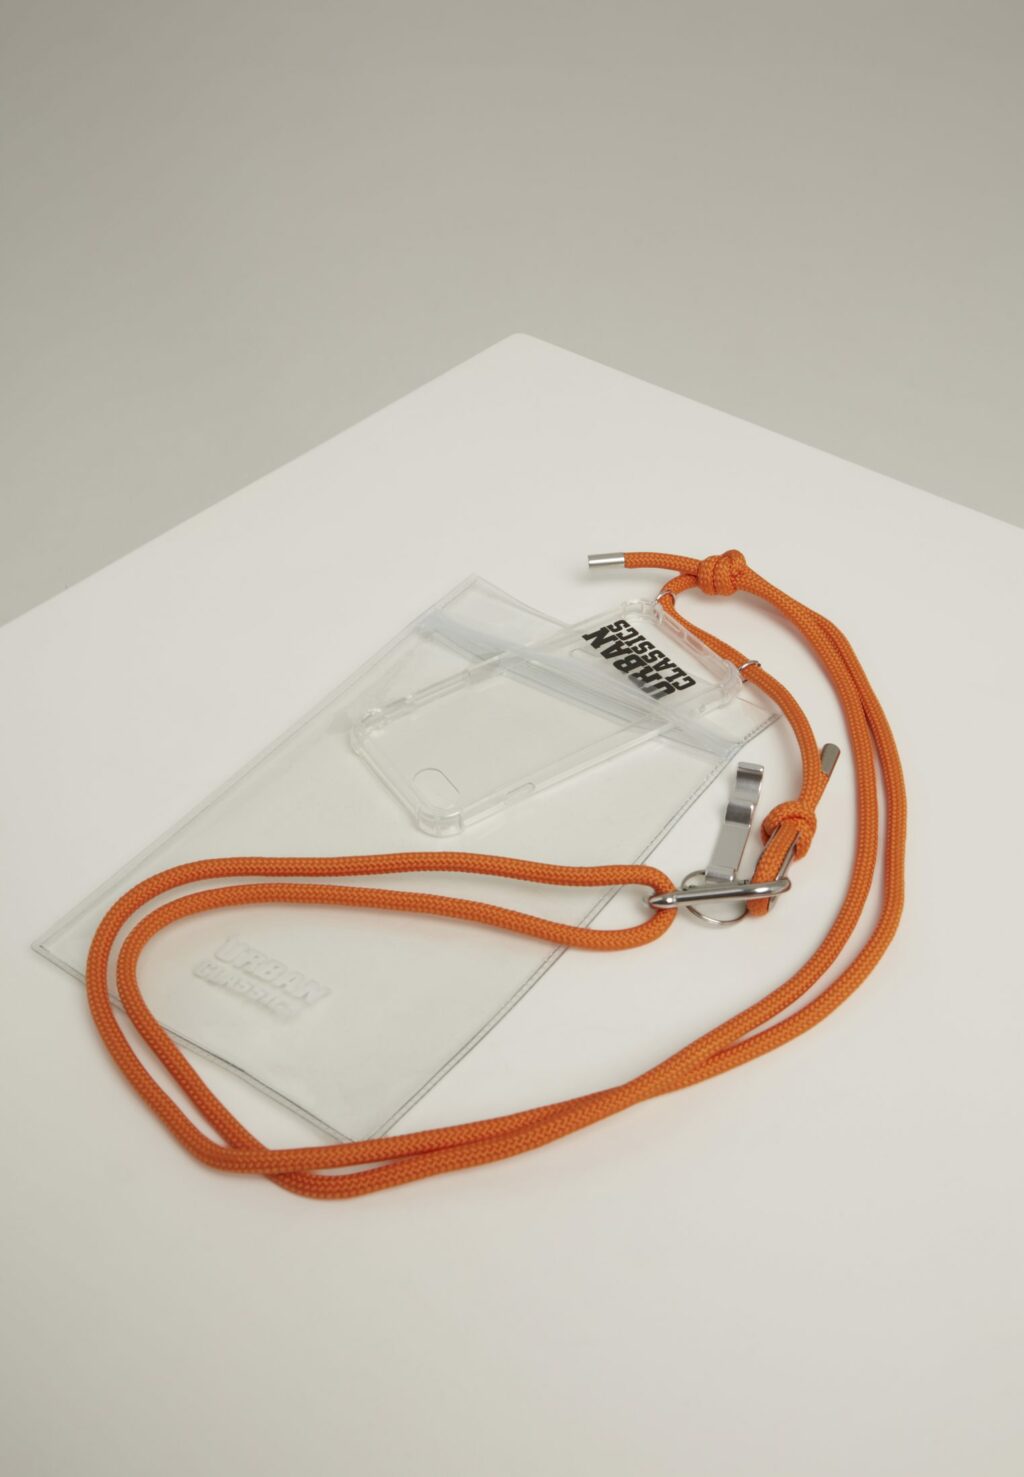 Phone Necklace with Additionals I Phone 8 transparent/orange one TB3301